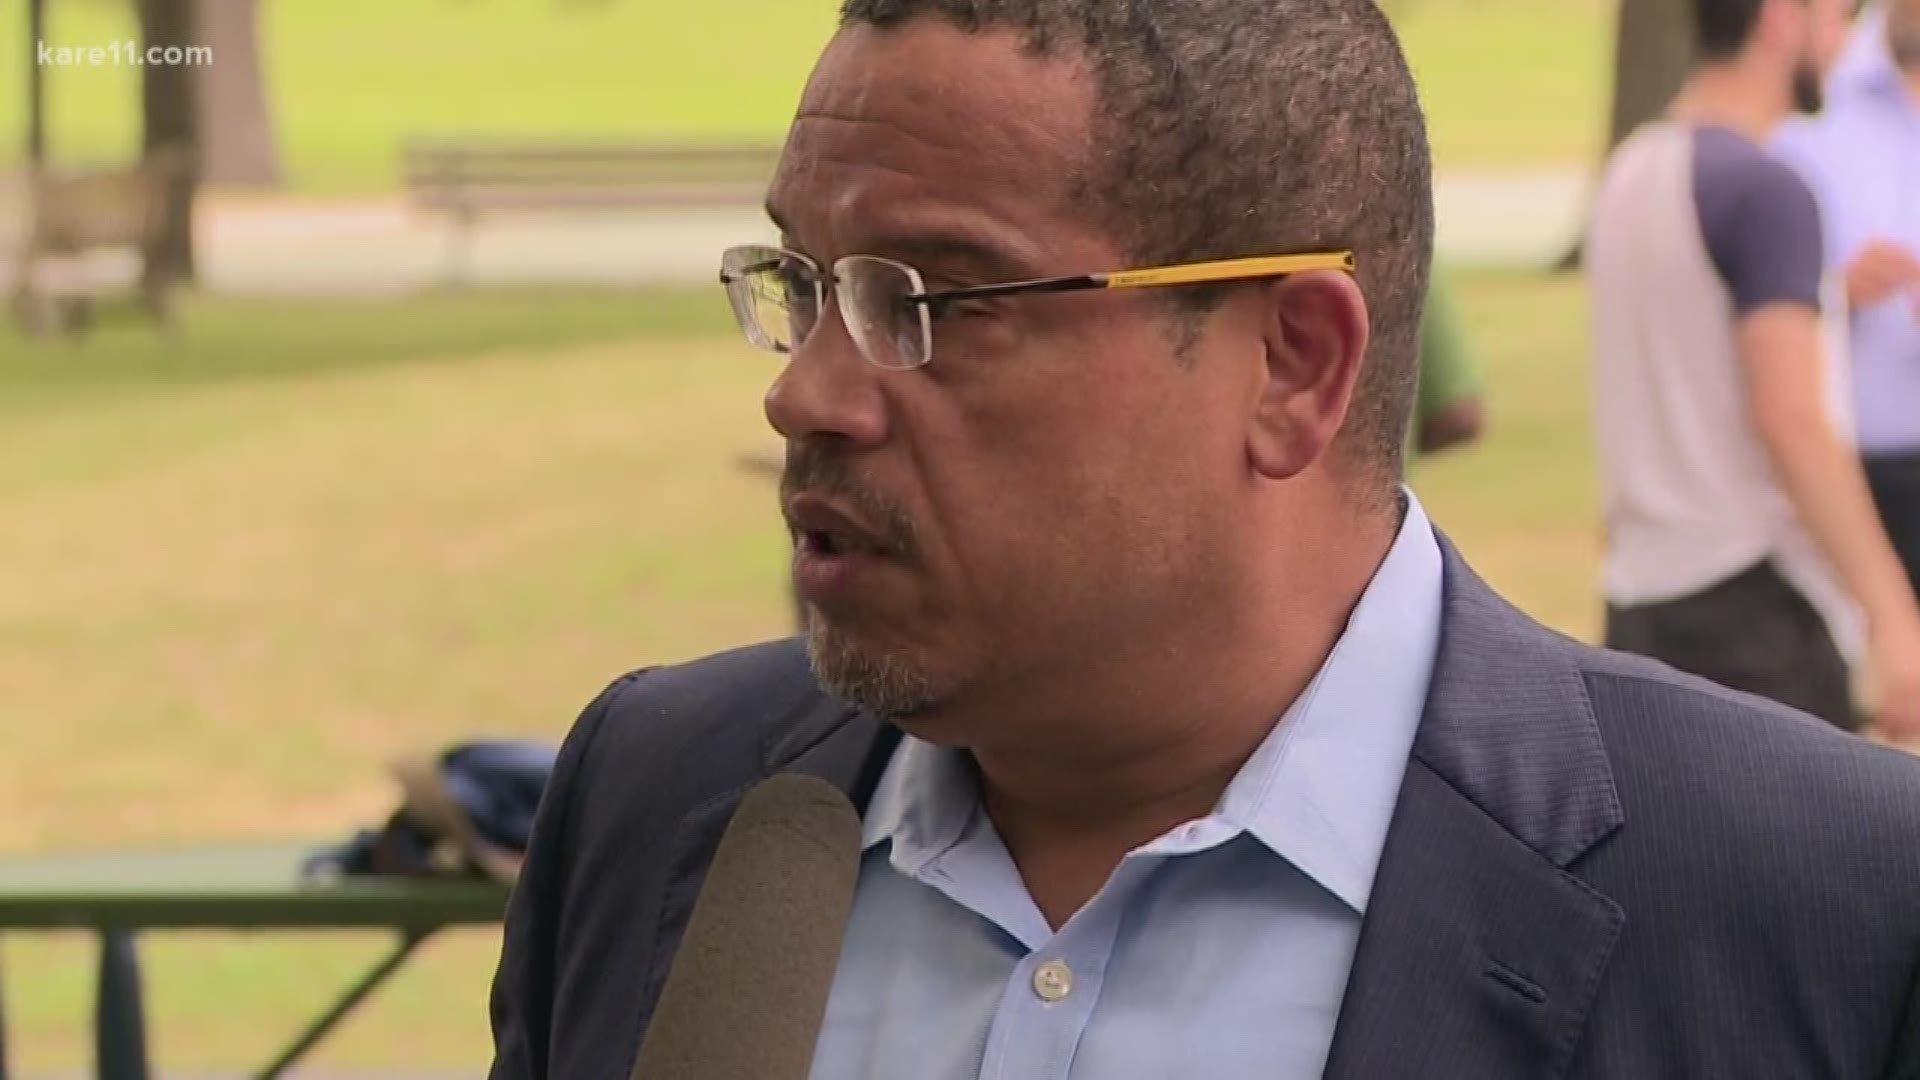 Rep. Keith Ellison addresses abuse accusations